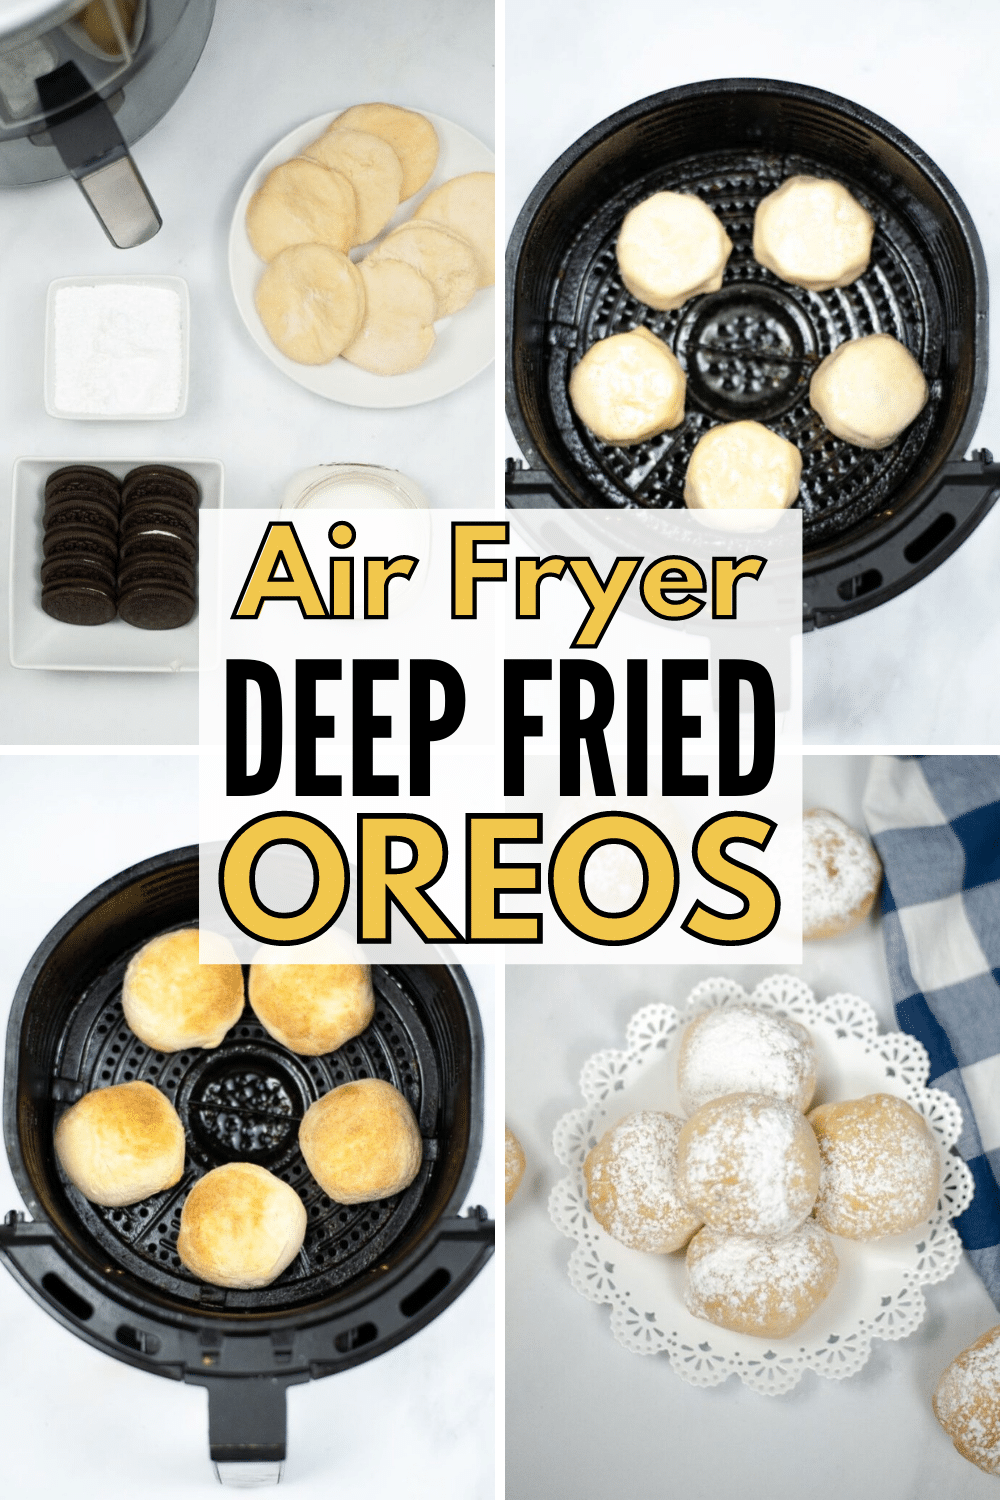 These Air Fryer Deep Fried Oreos let you indulge in delicious fair food with less guilt! #airfryer #oreos #cookies via @wondermomwannab